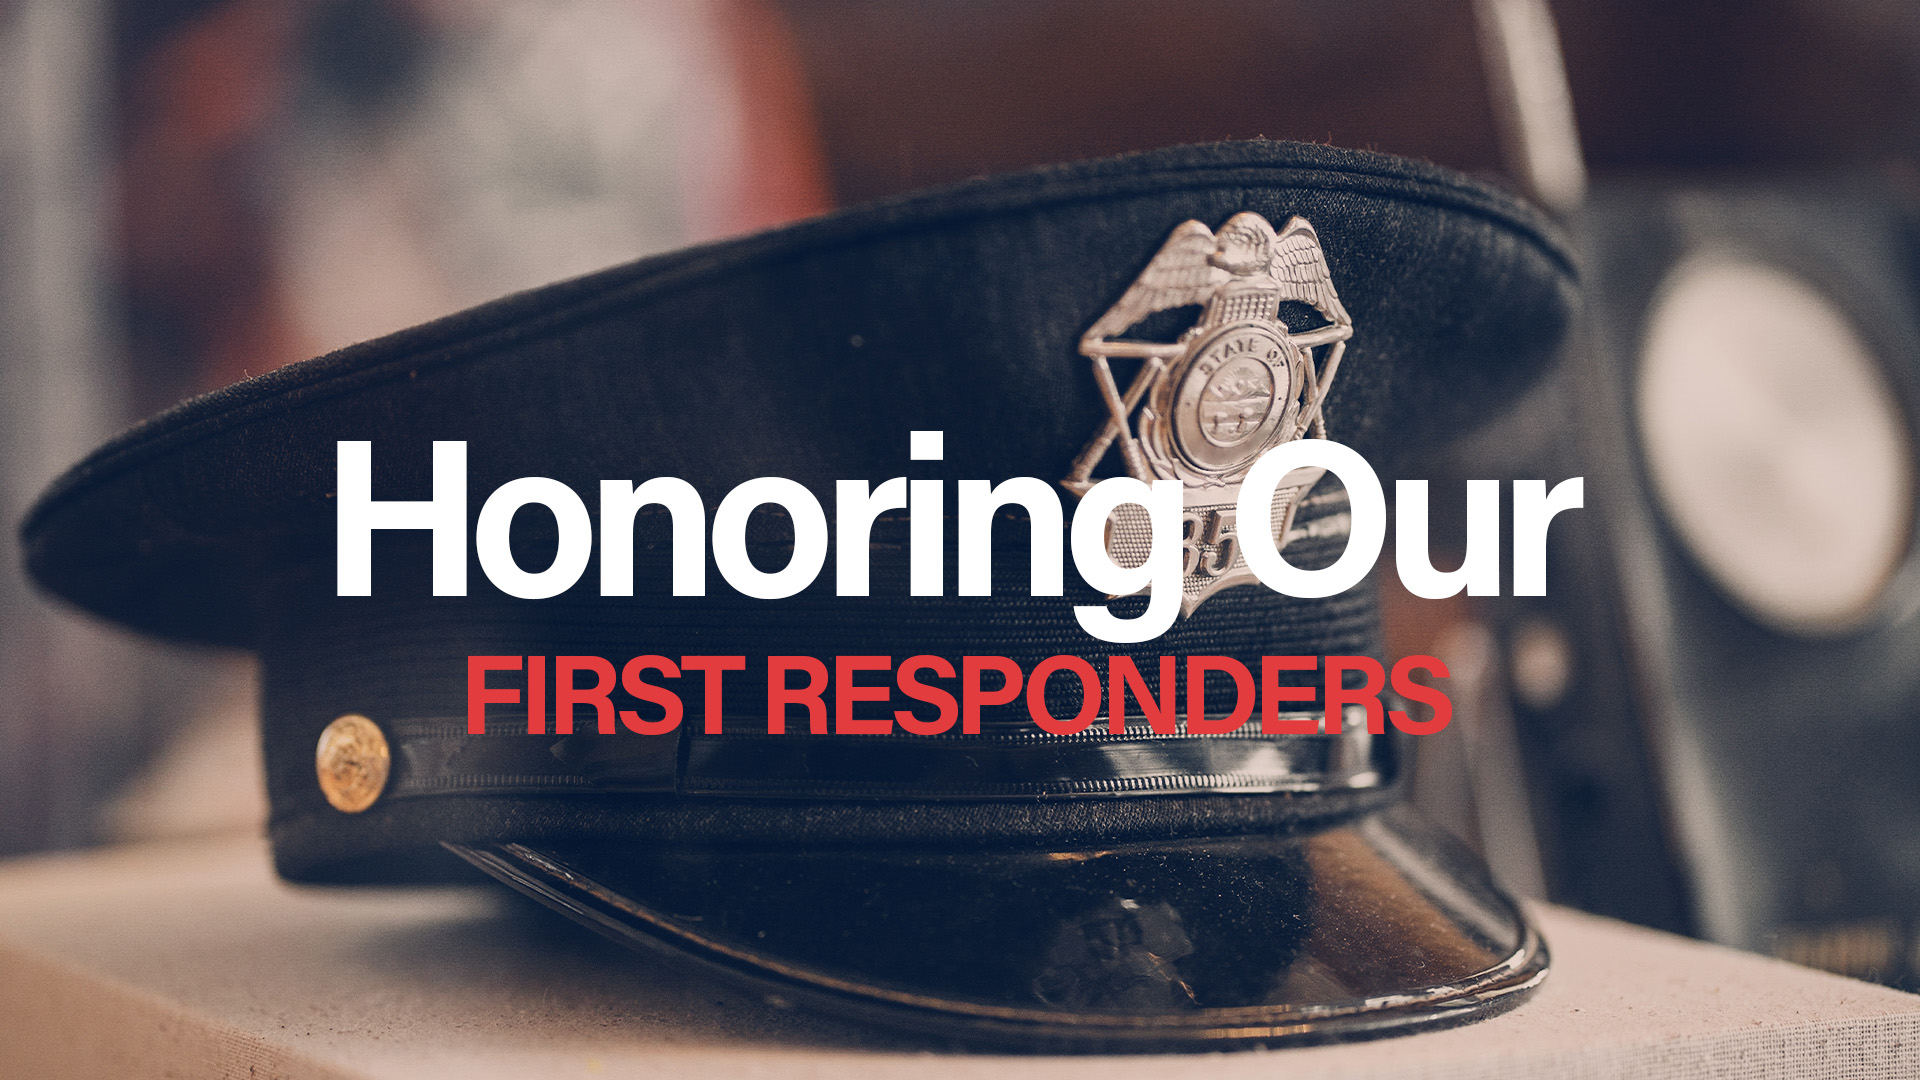 HONORING OUR FIRST RESPONDERS